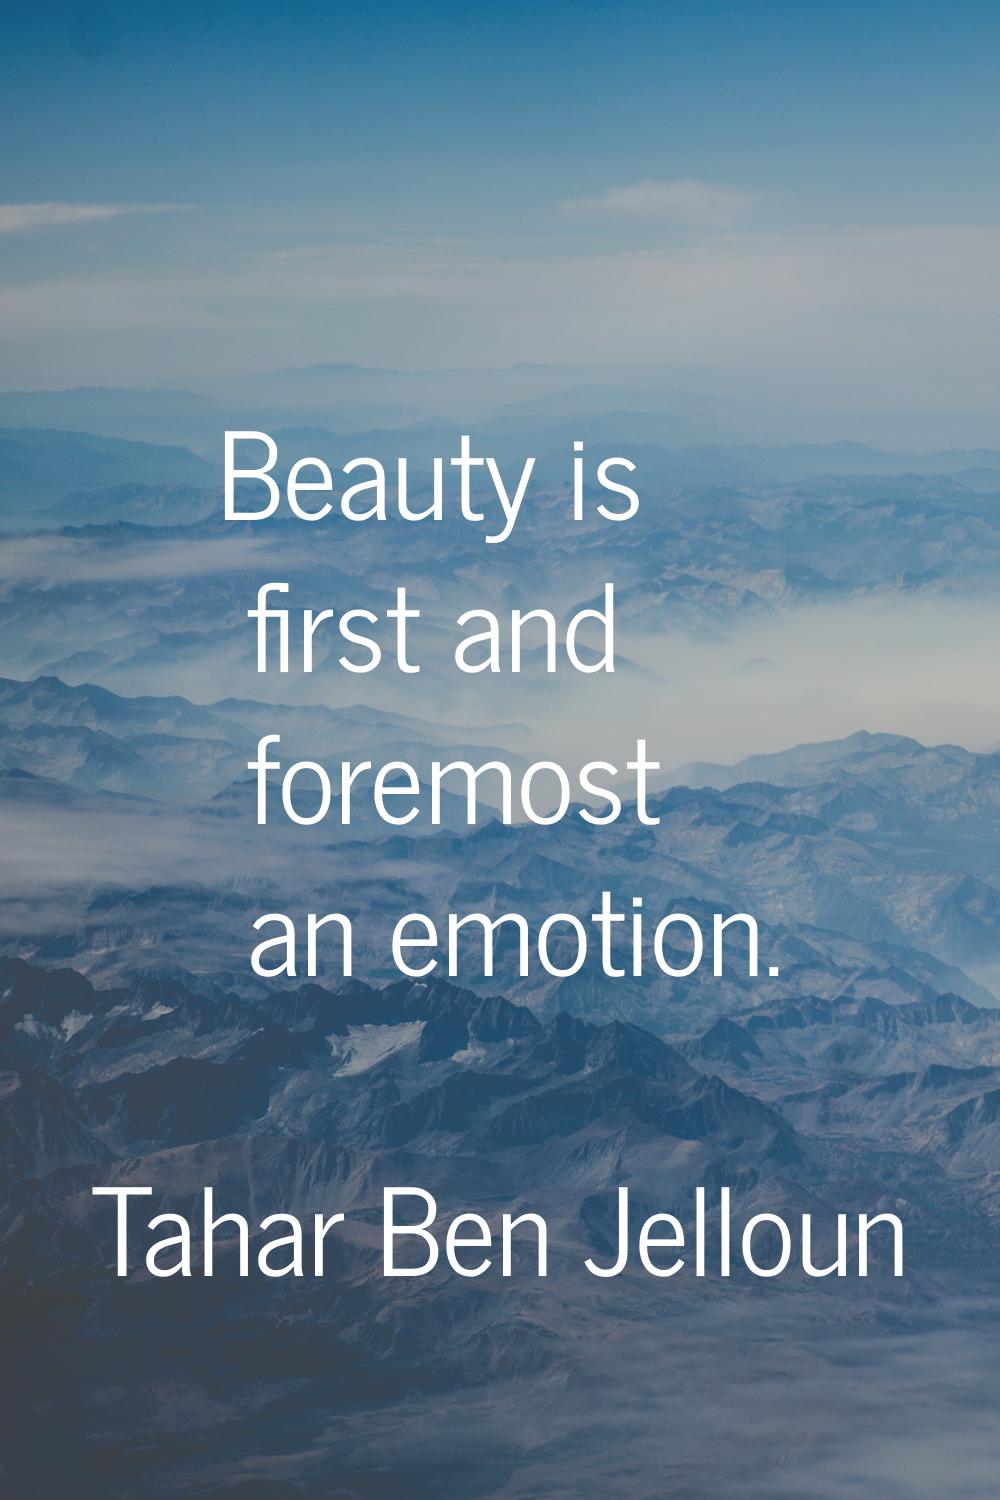 Beauty is first and foremost an emotion.